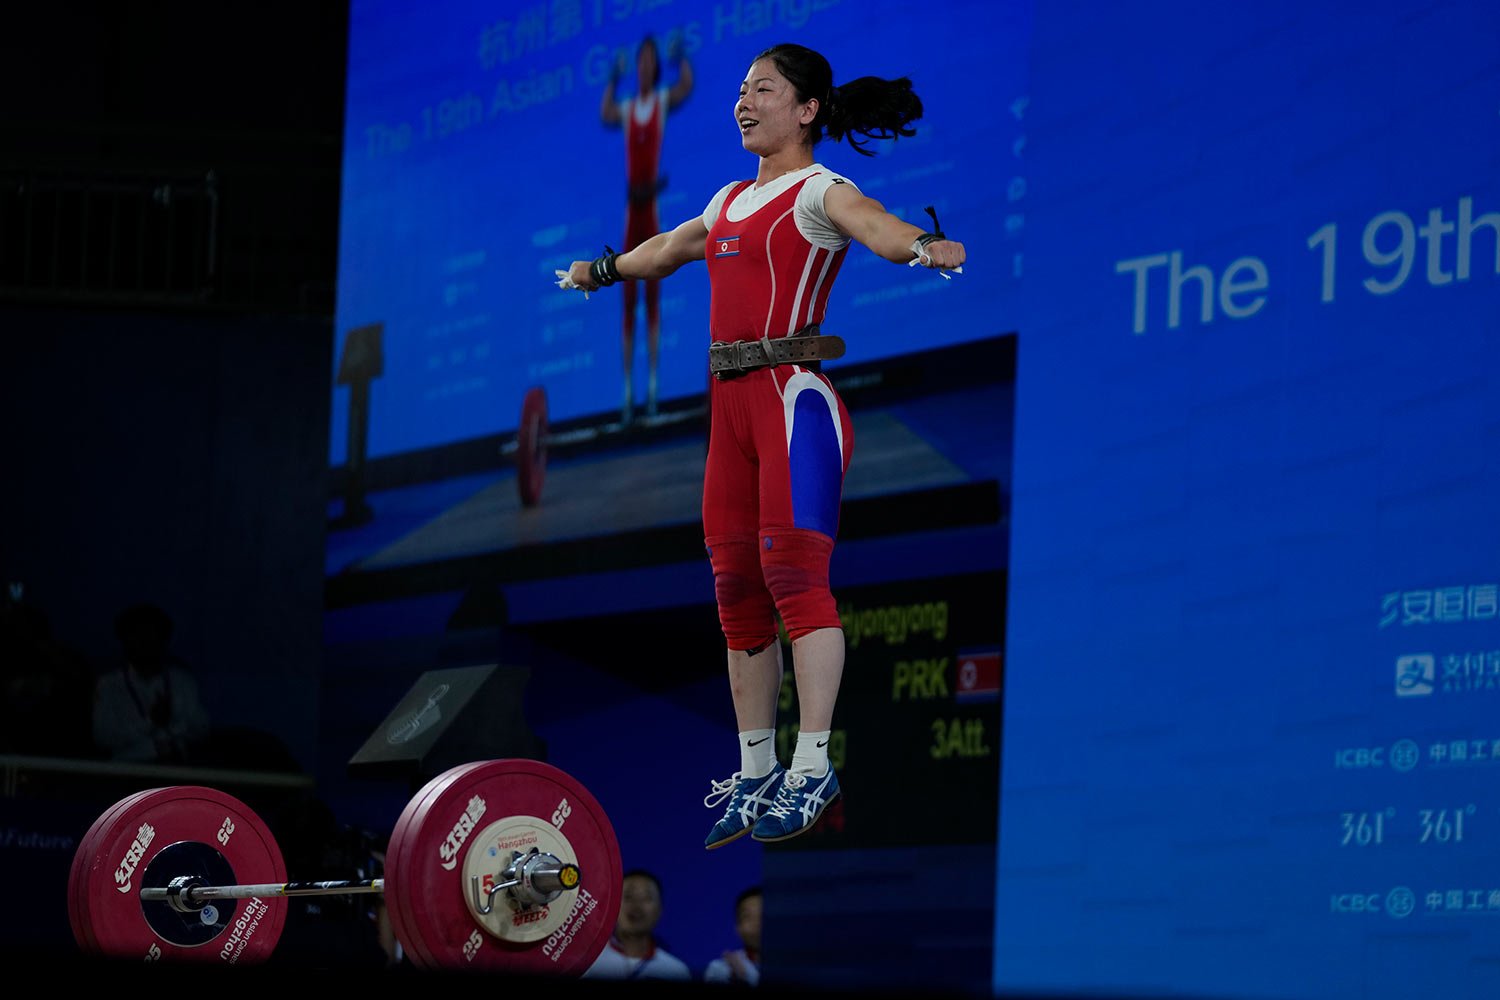  North Korea's Hyongyong Kang celebrates after winning the gold medal in the women's 55kg Group A weightlifting final at 19th Asian Games in Hangzhou, China, Saturday, Sept. 30, 2023. (AP Photo/Aijaz Rahi) 